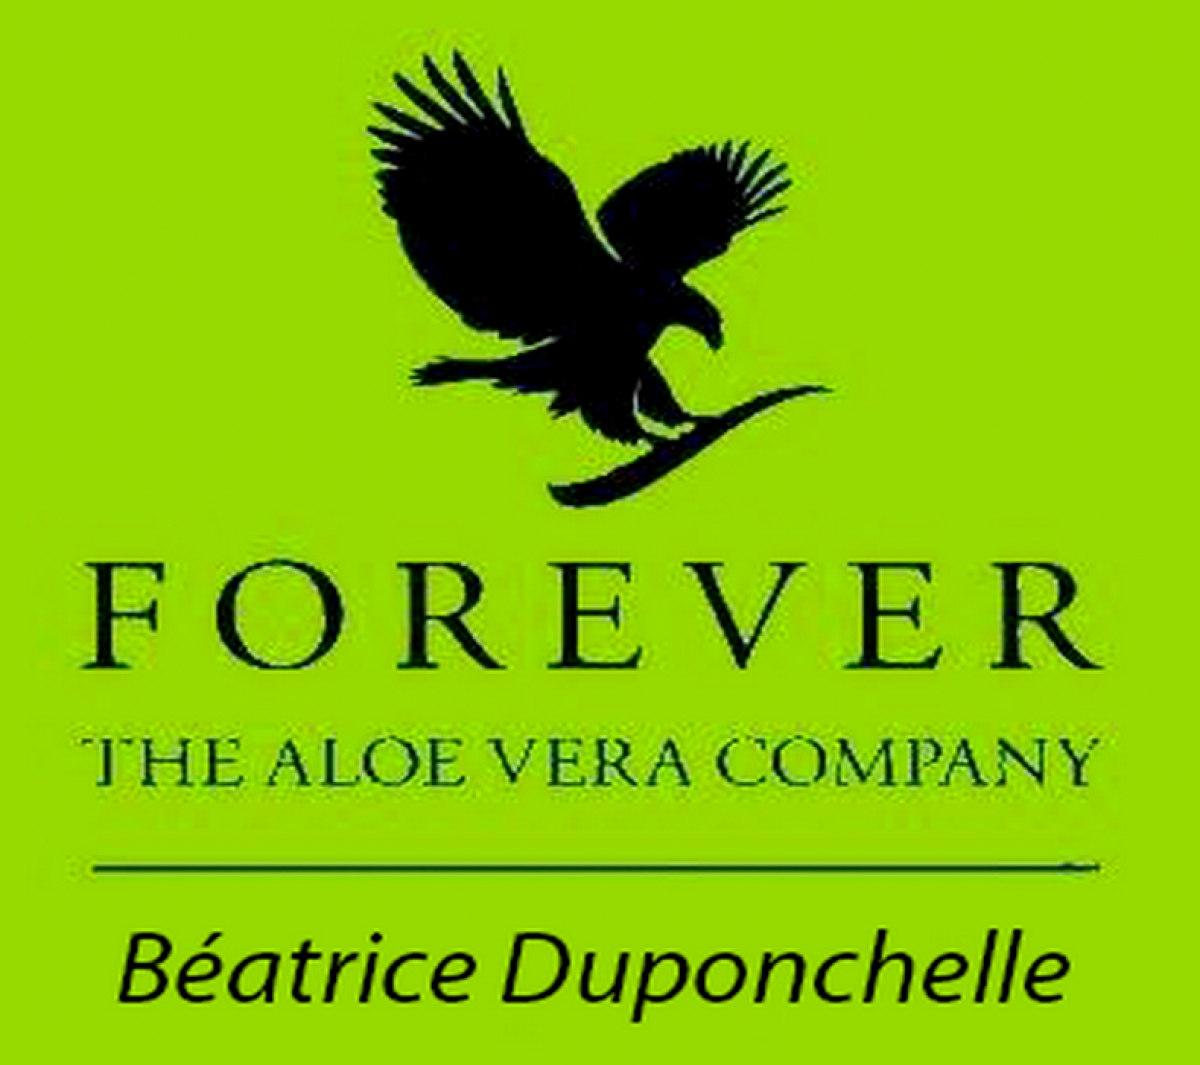 FOREVER BY BEATRICE